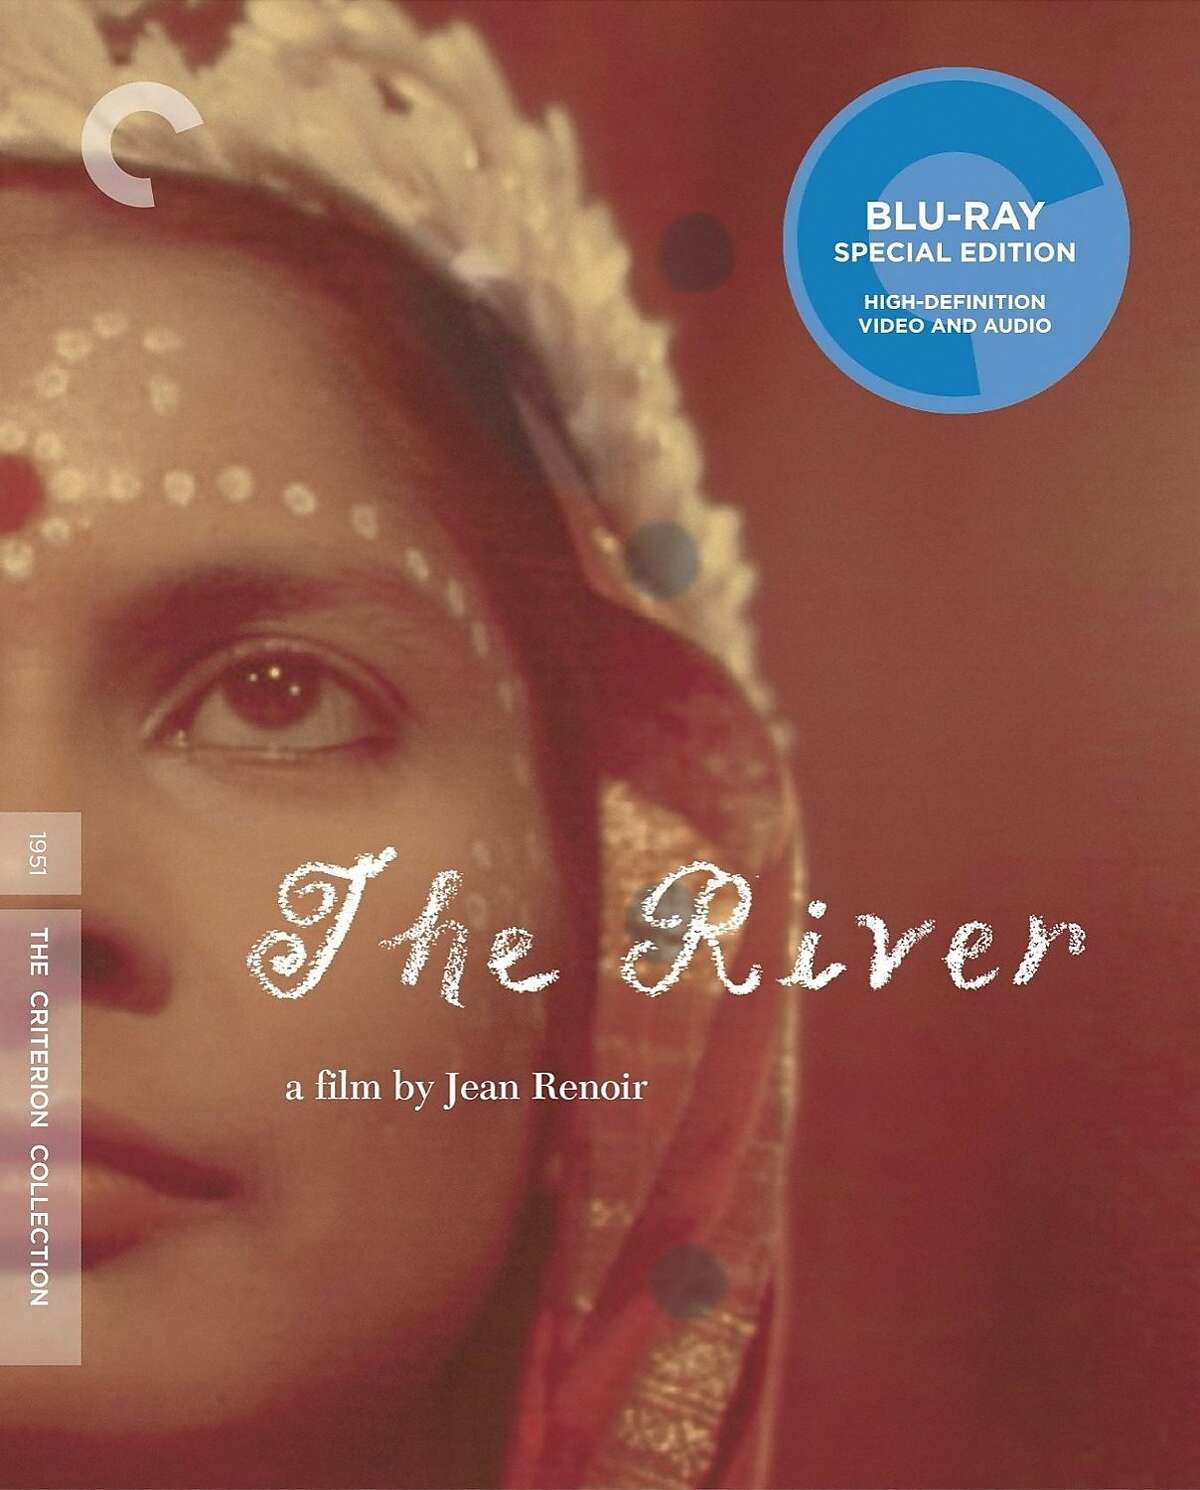 THE DARJEELING LIMITED / THE RIVER Showtimes